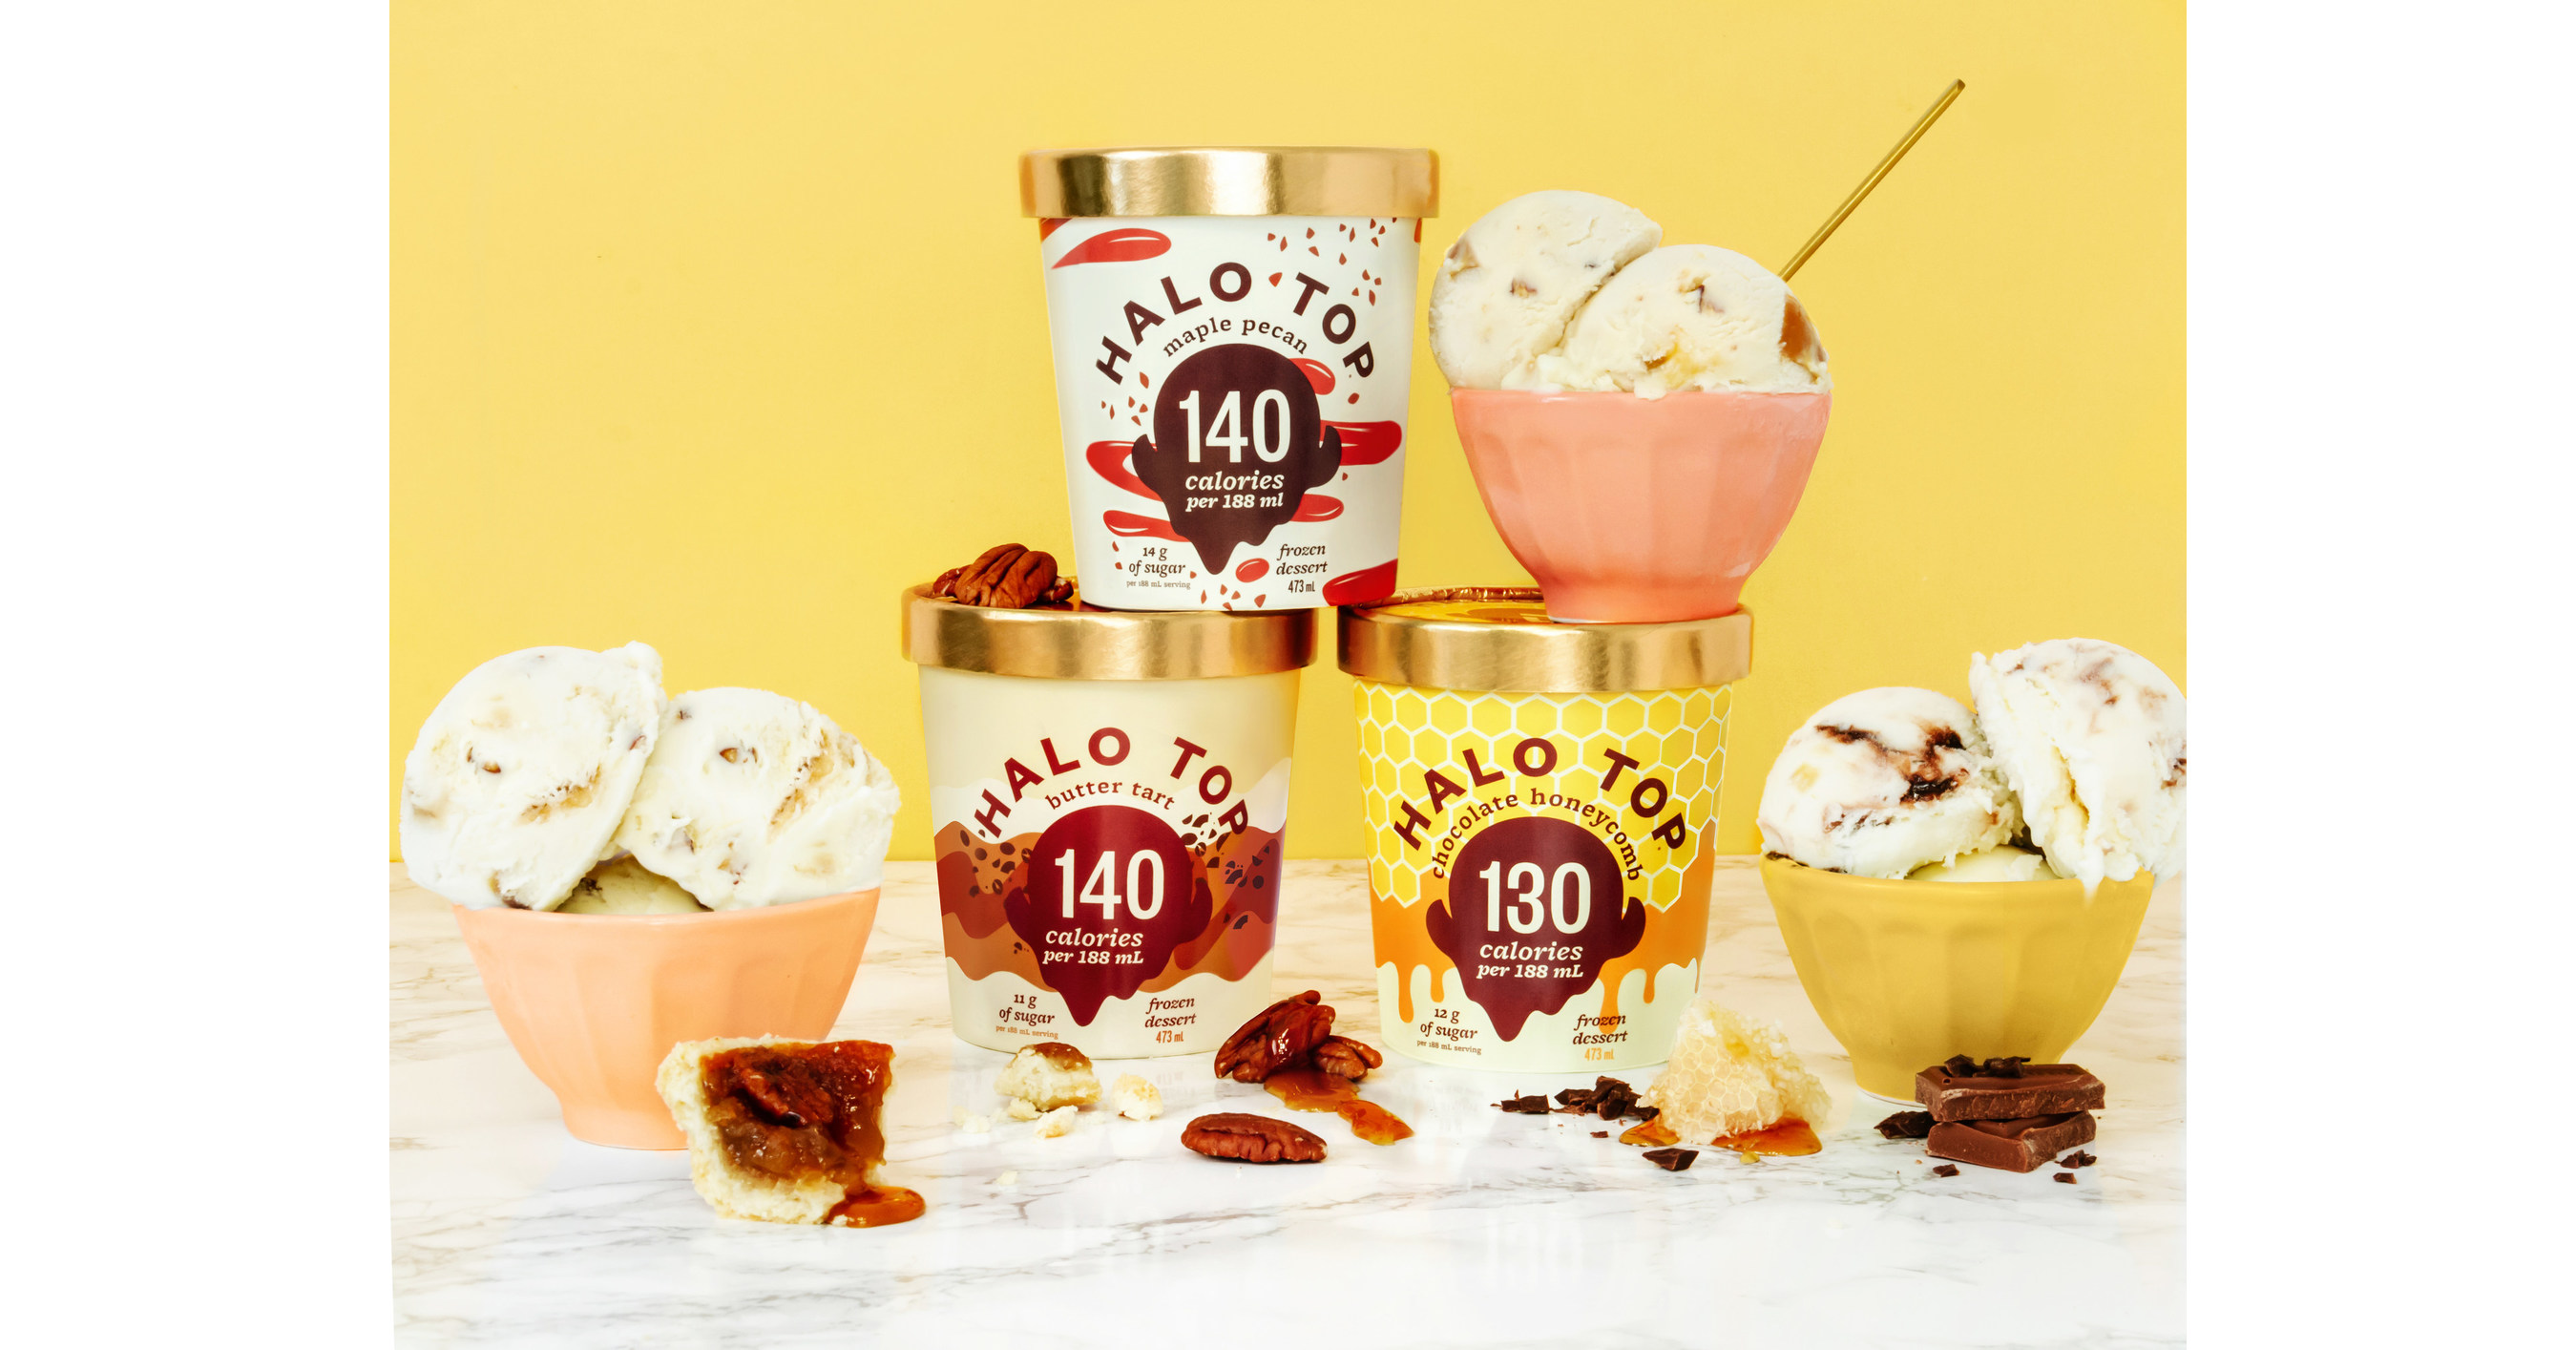 Top Creamery Introduces Its Eh-xclusively Canadian Line-Up